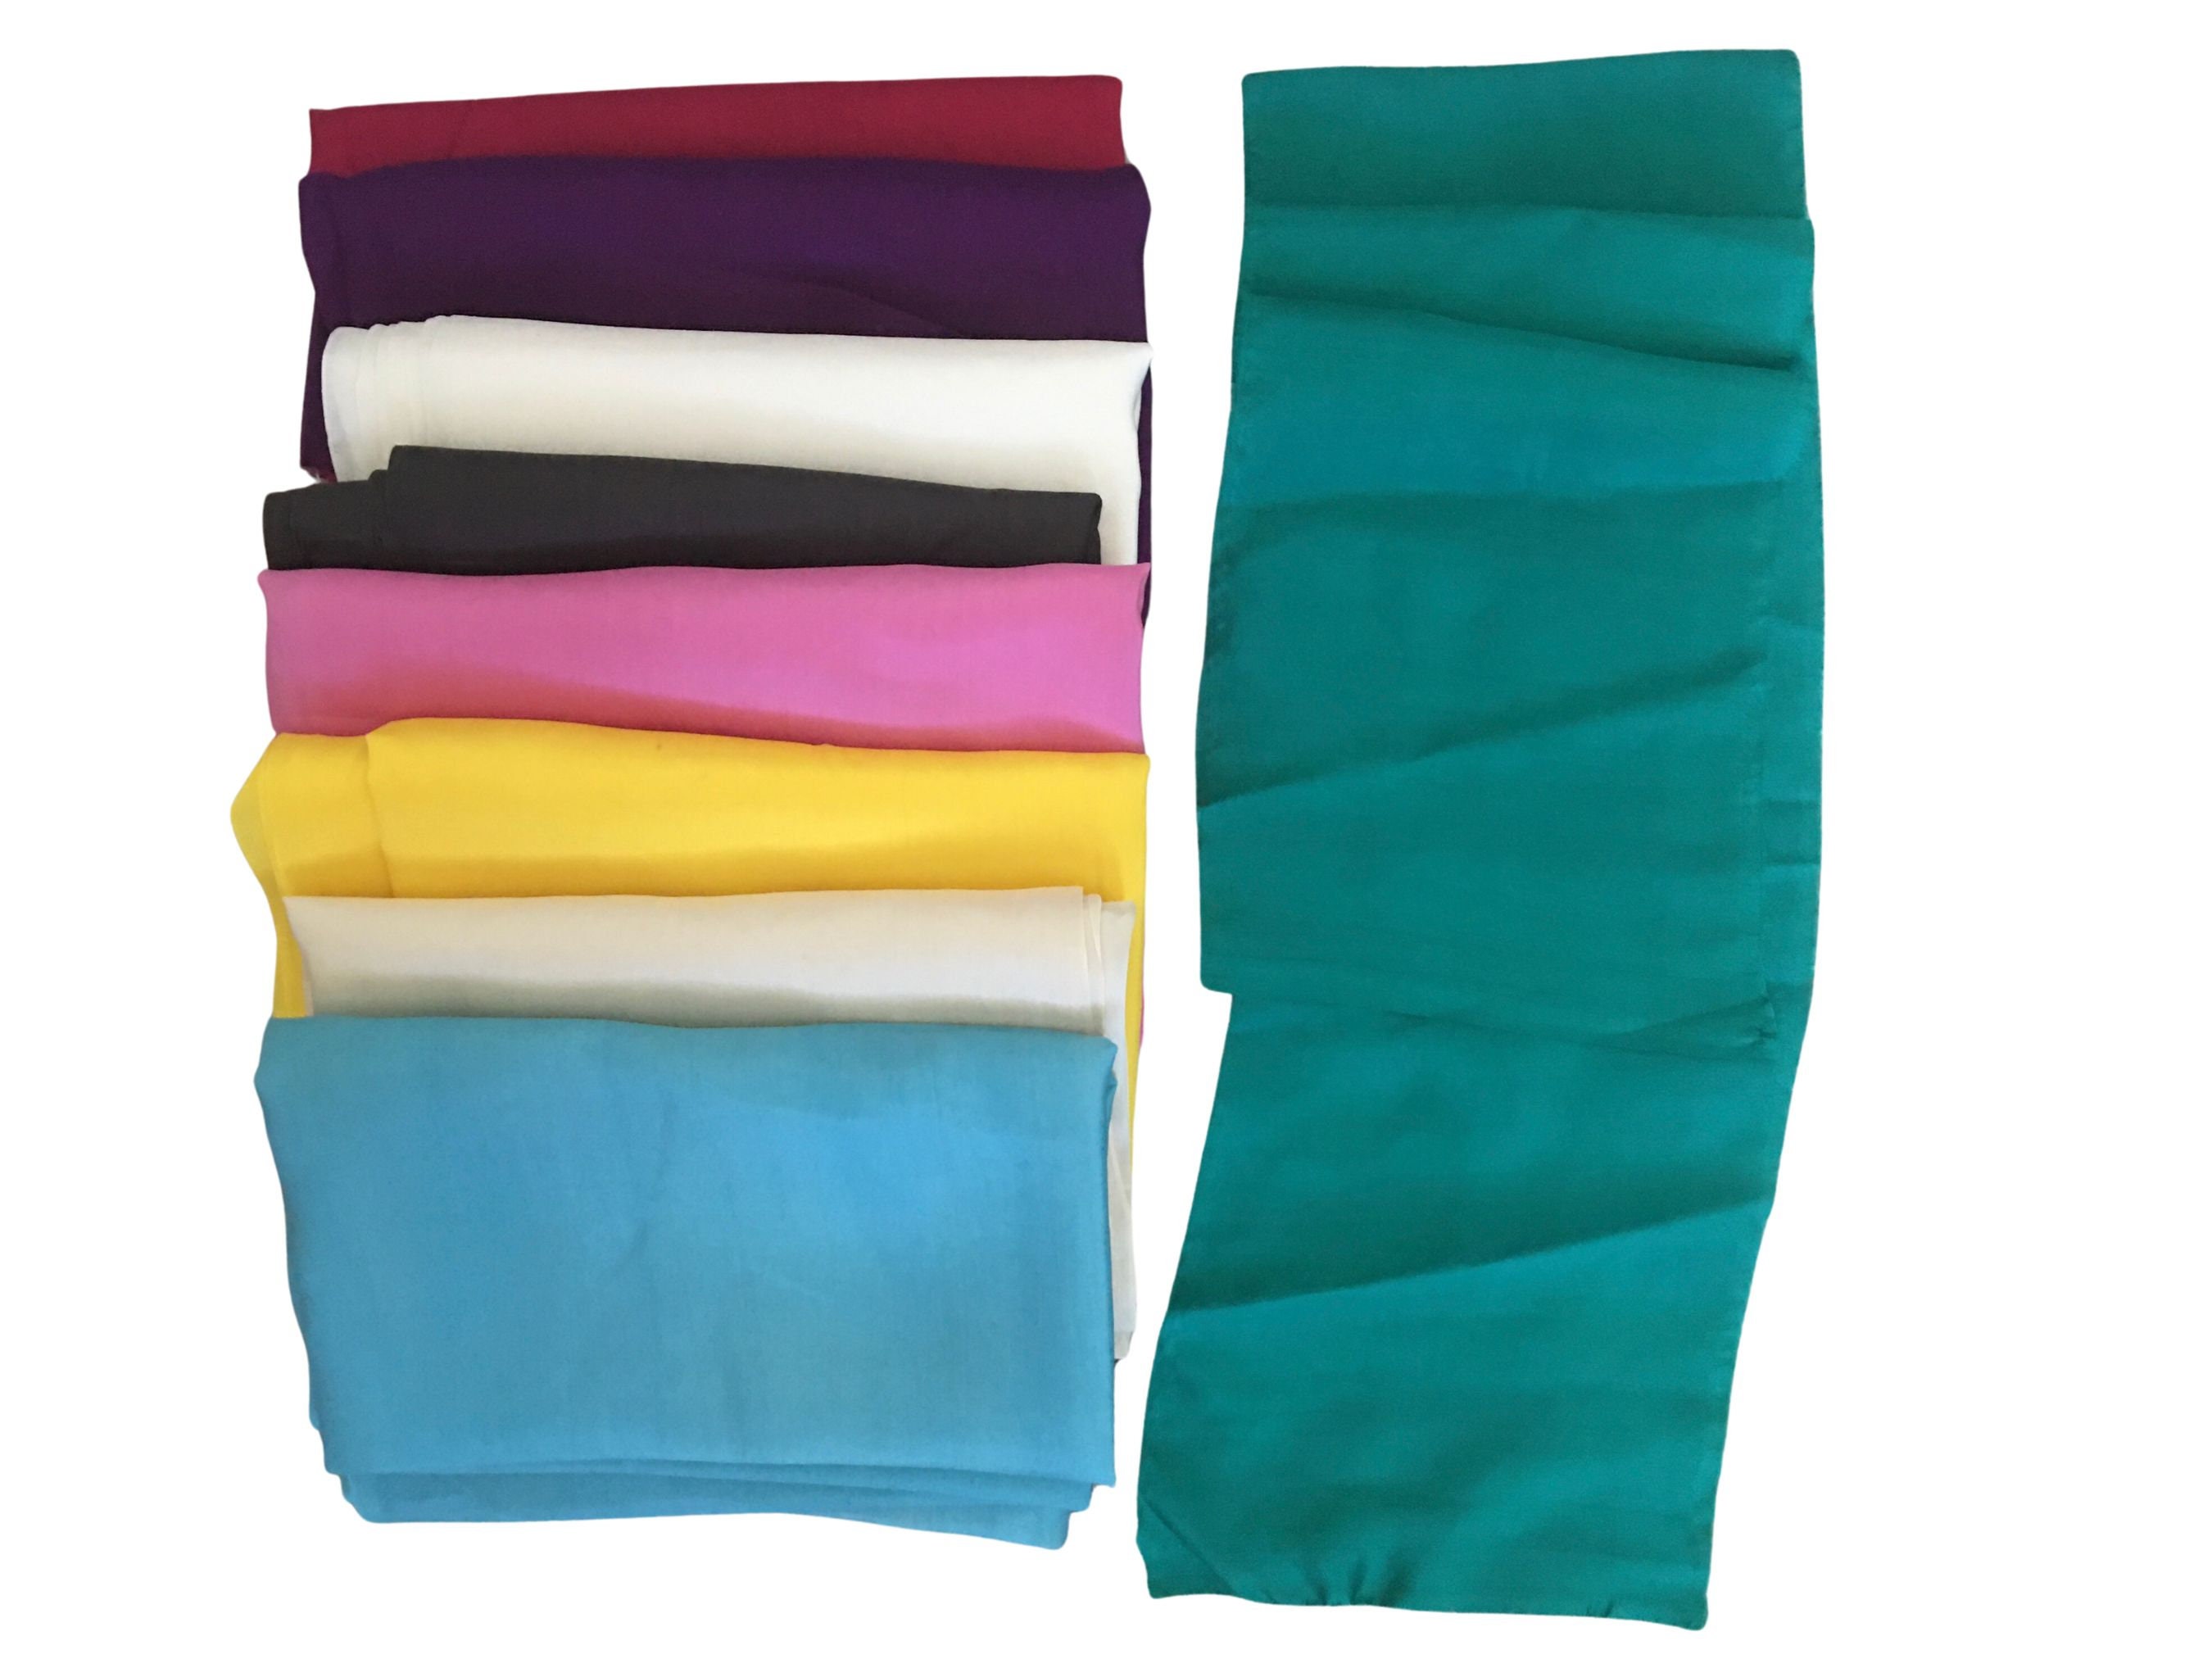 SILK BLEND FABRICS – Affordable fabric made with natural silk